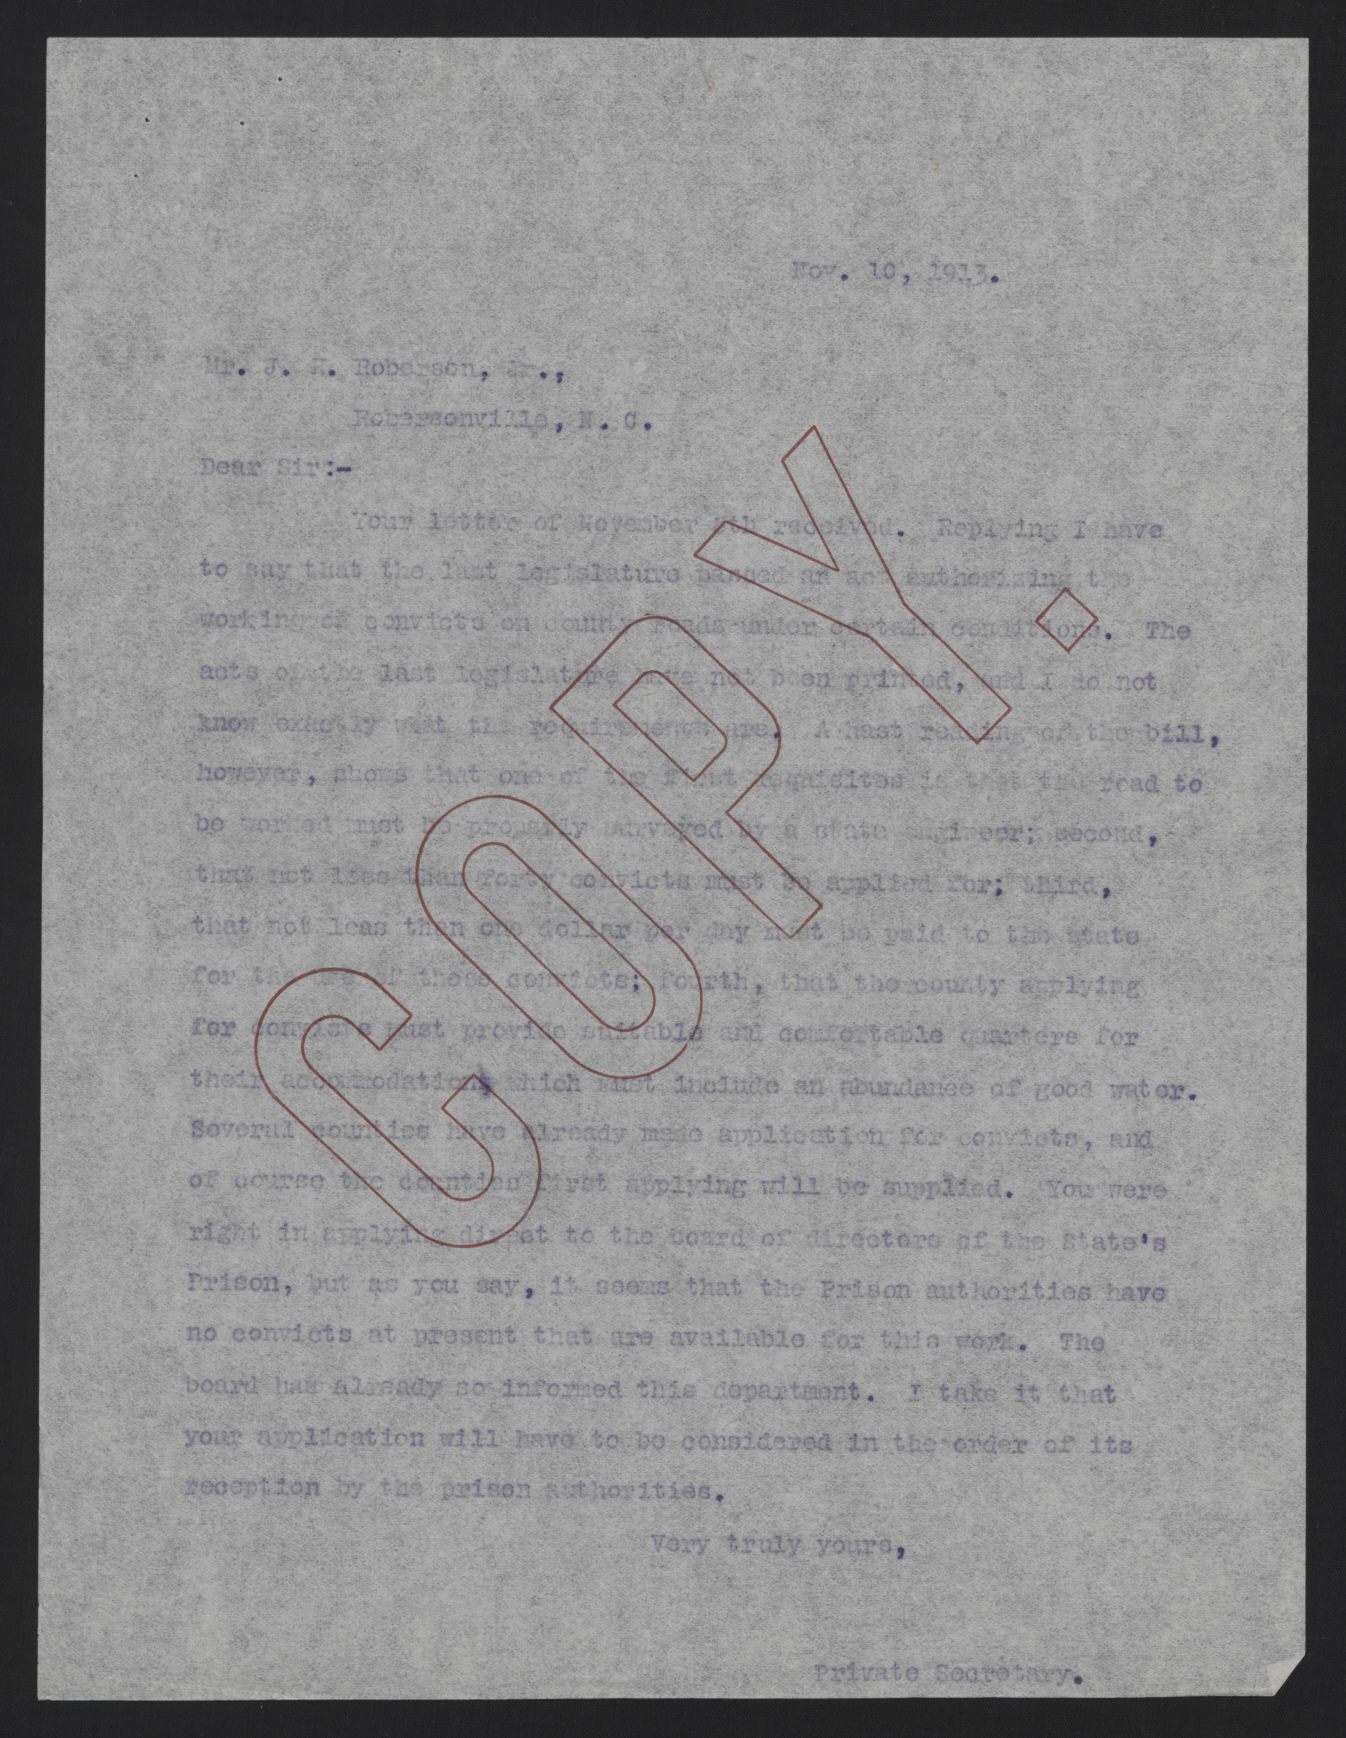 Letter from Kerr to Roberson, November 10, 1913